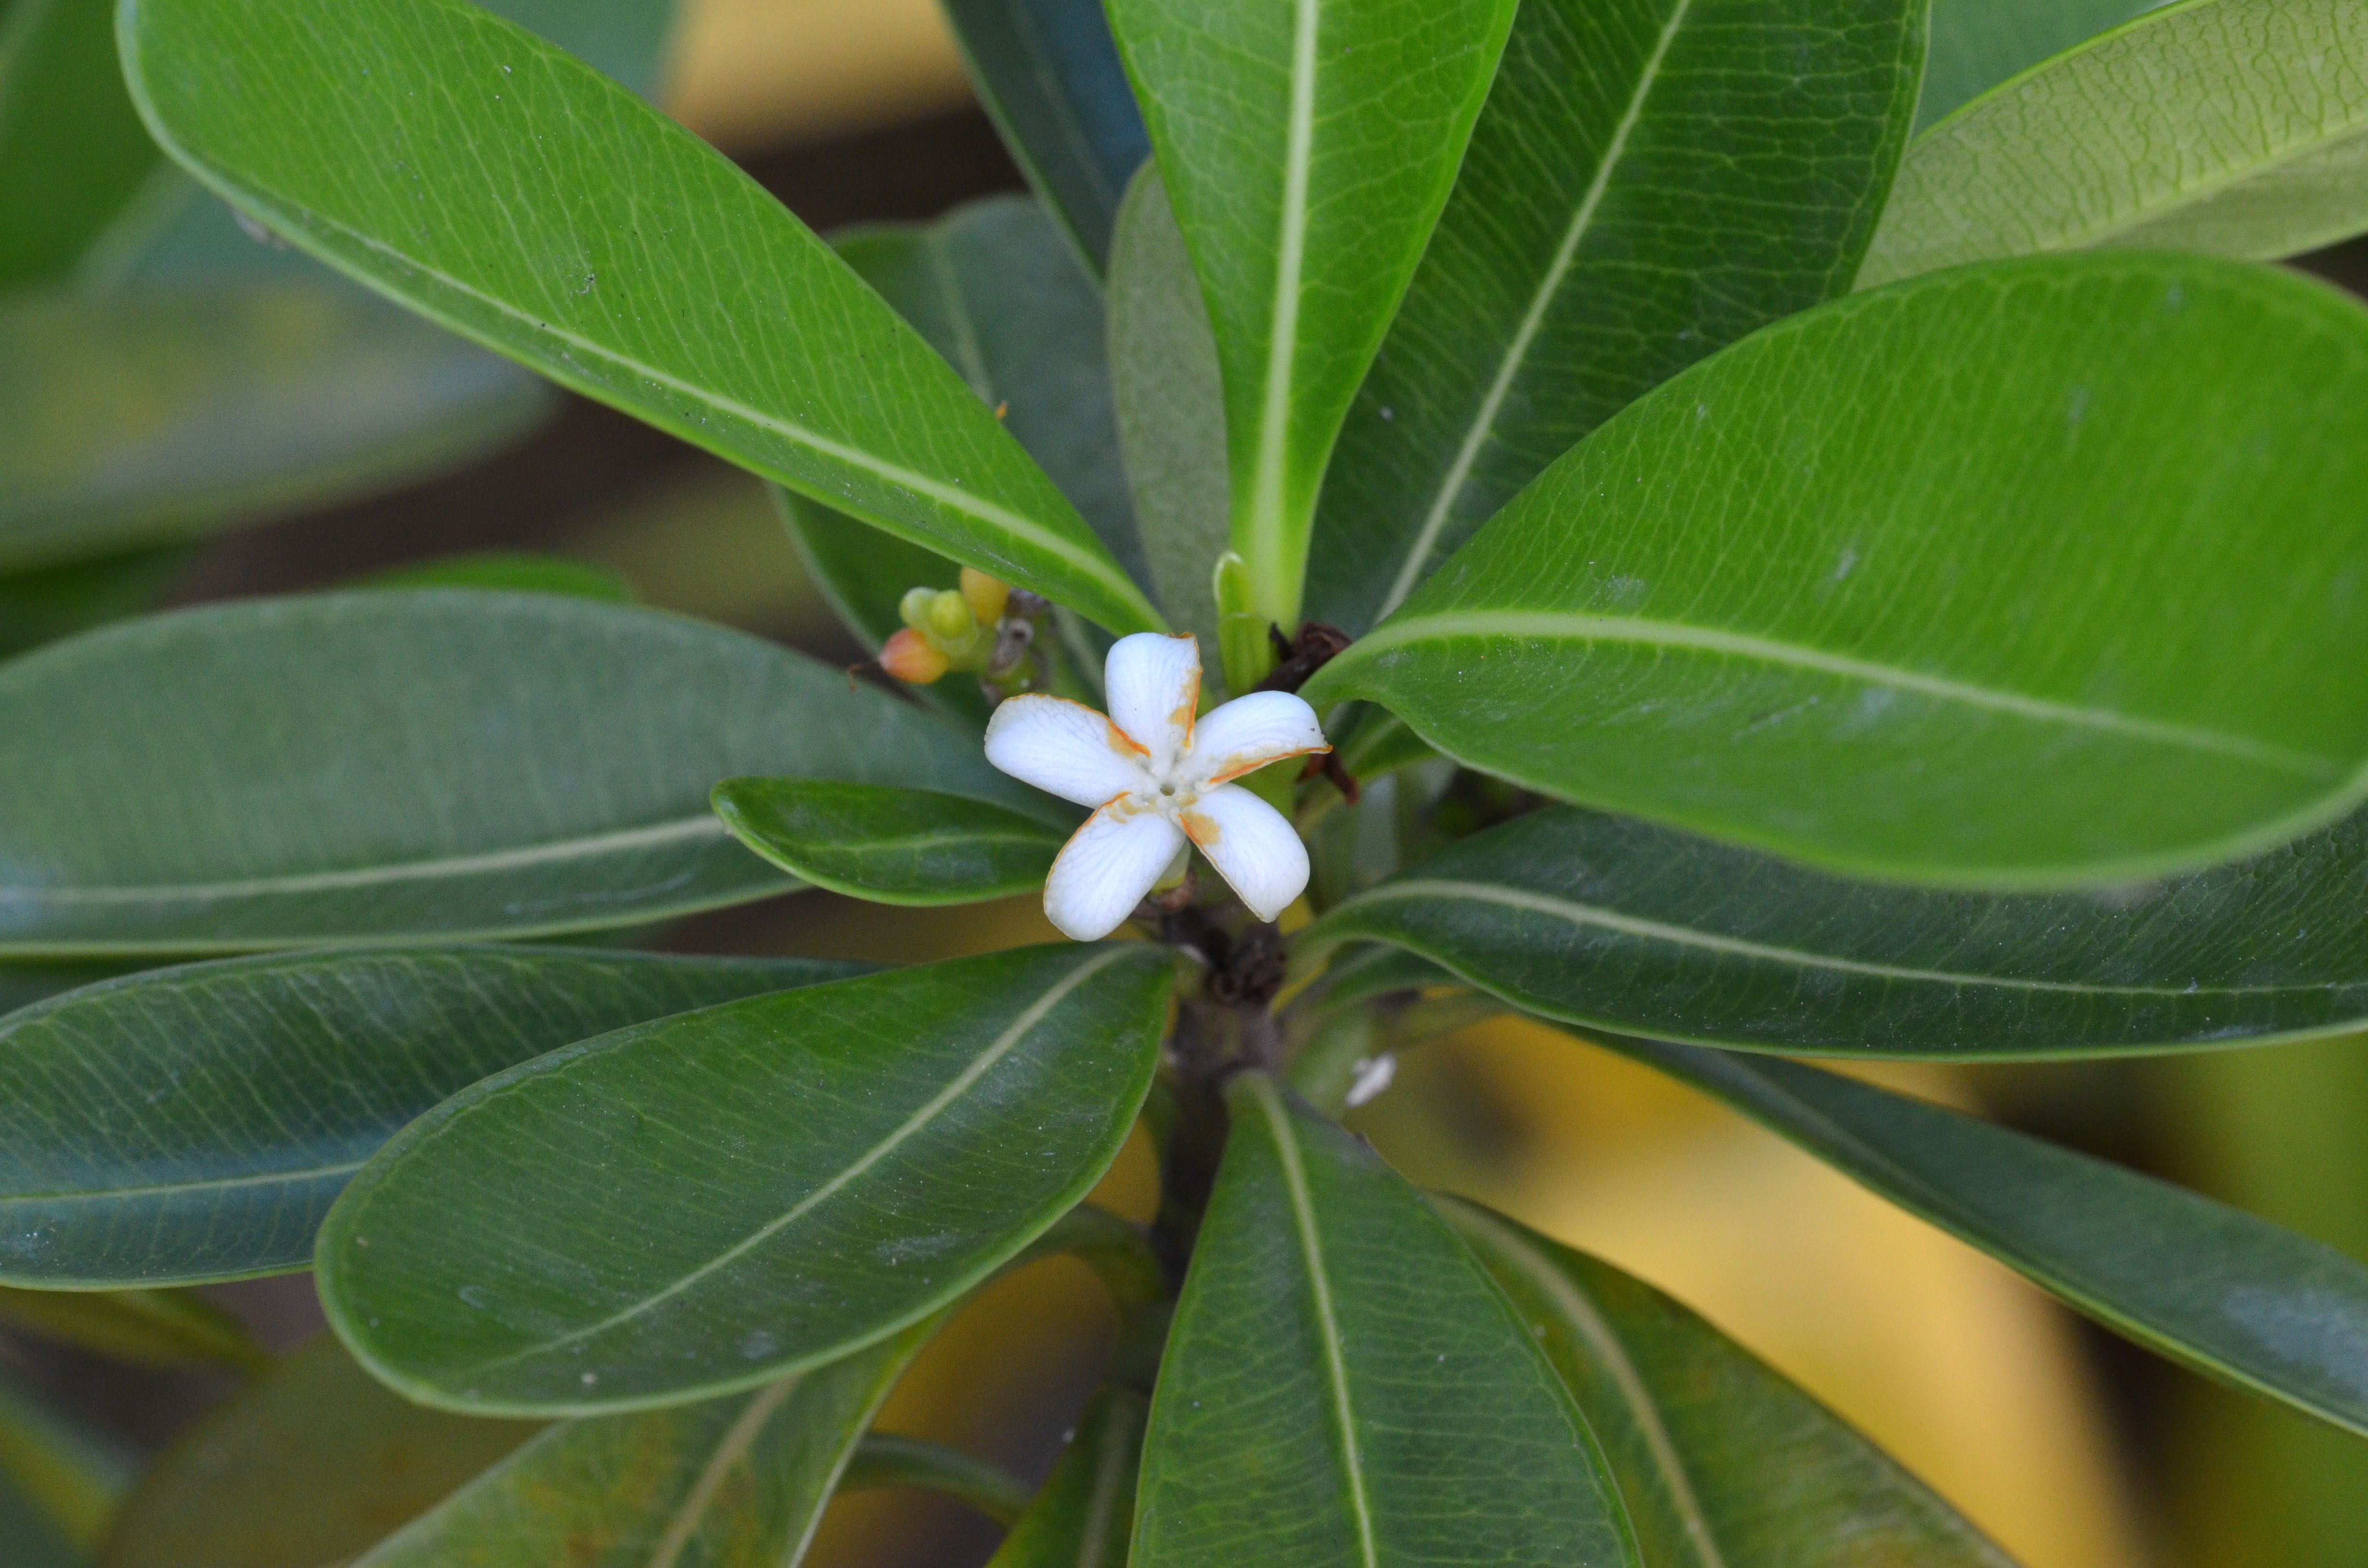 Close up of white flower and whorled leaves